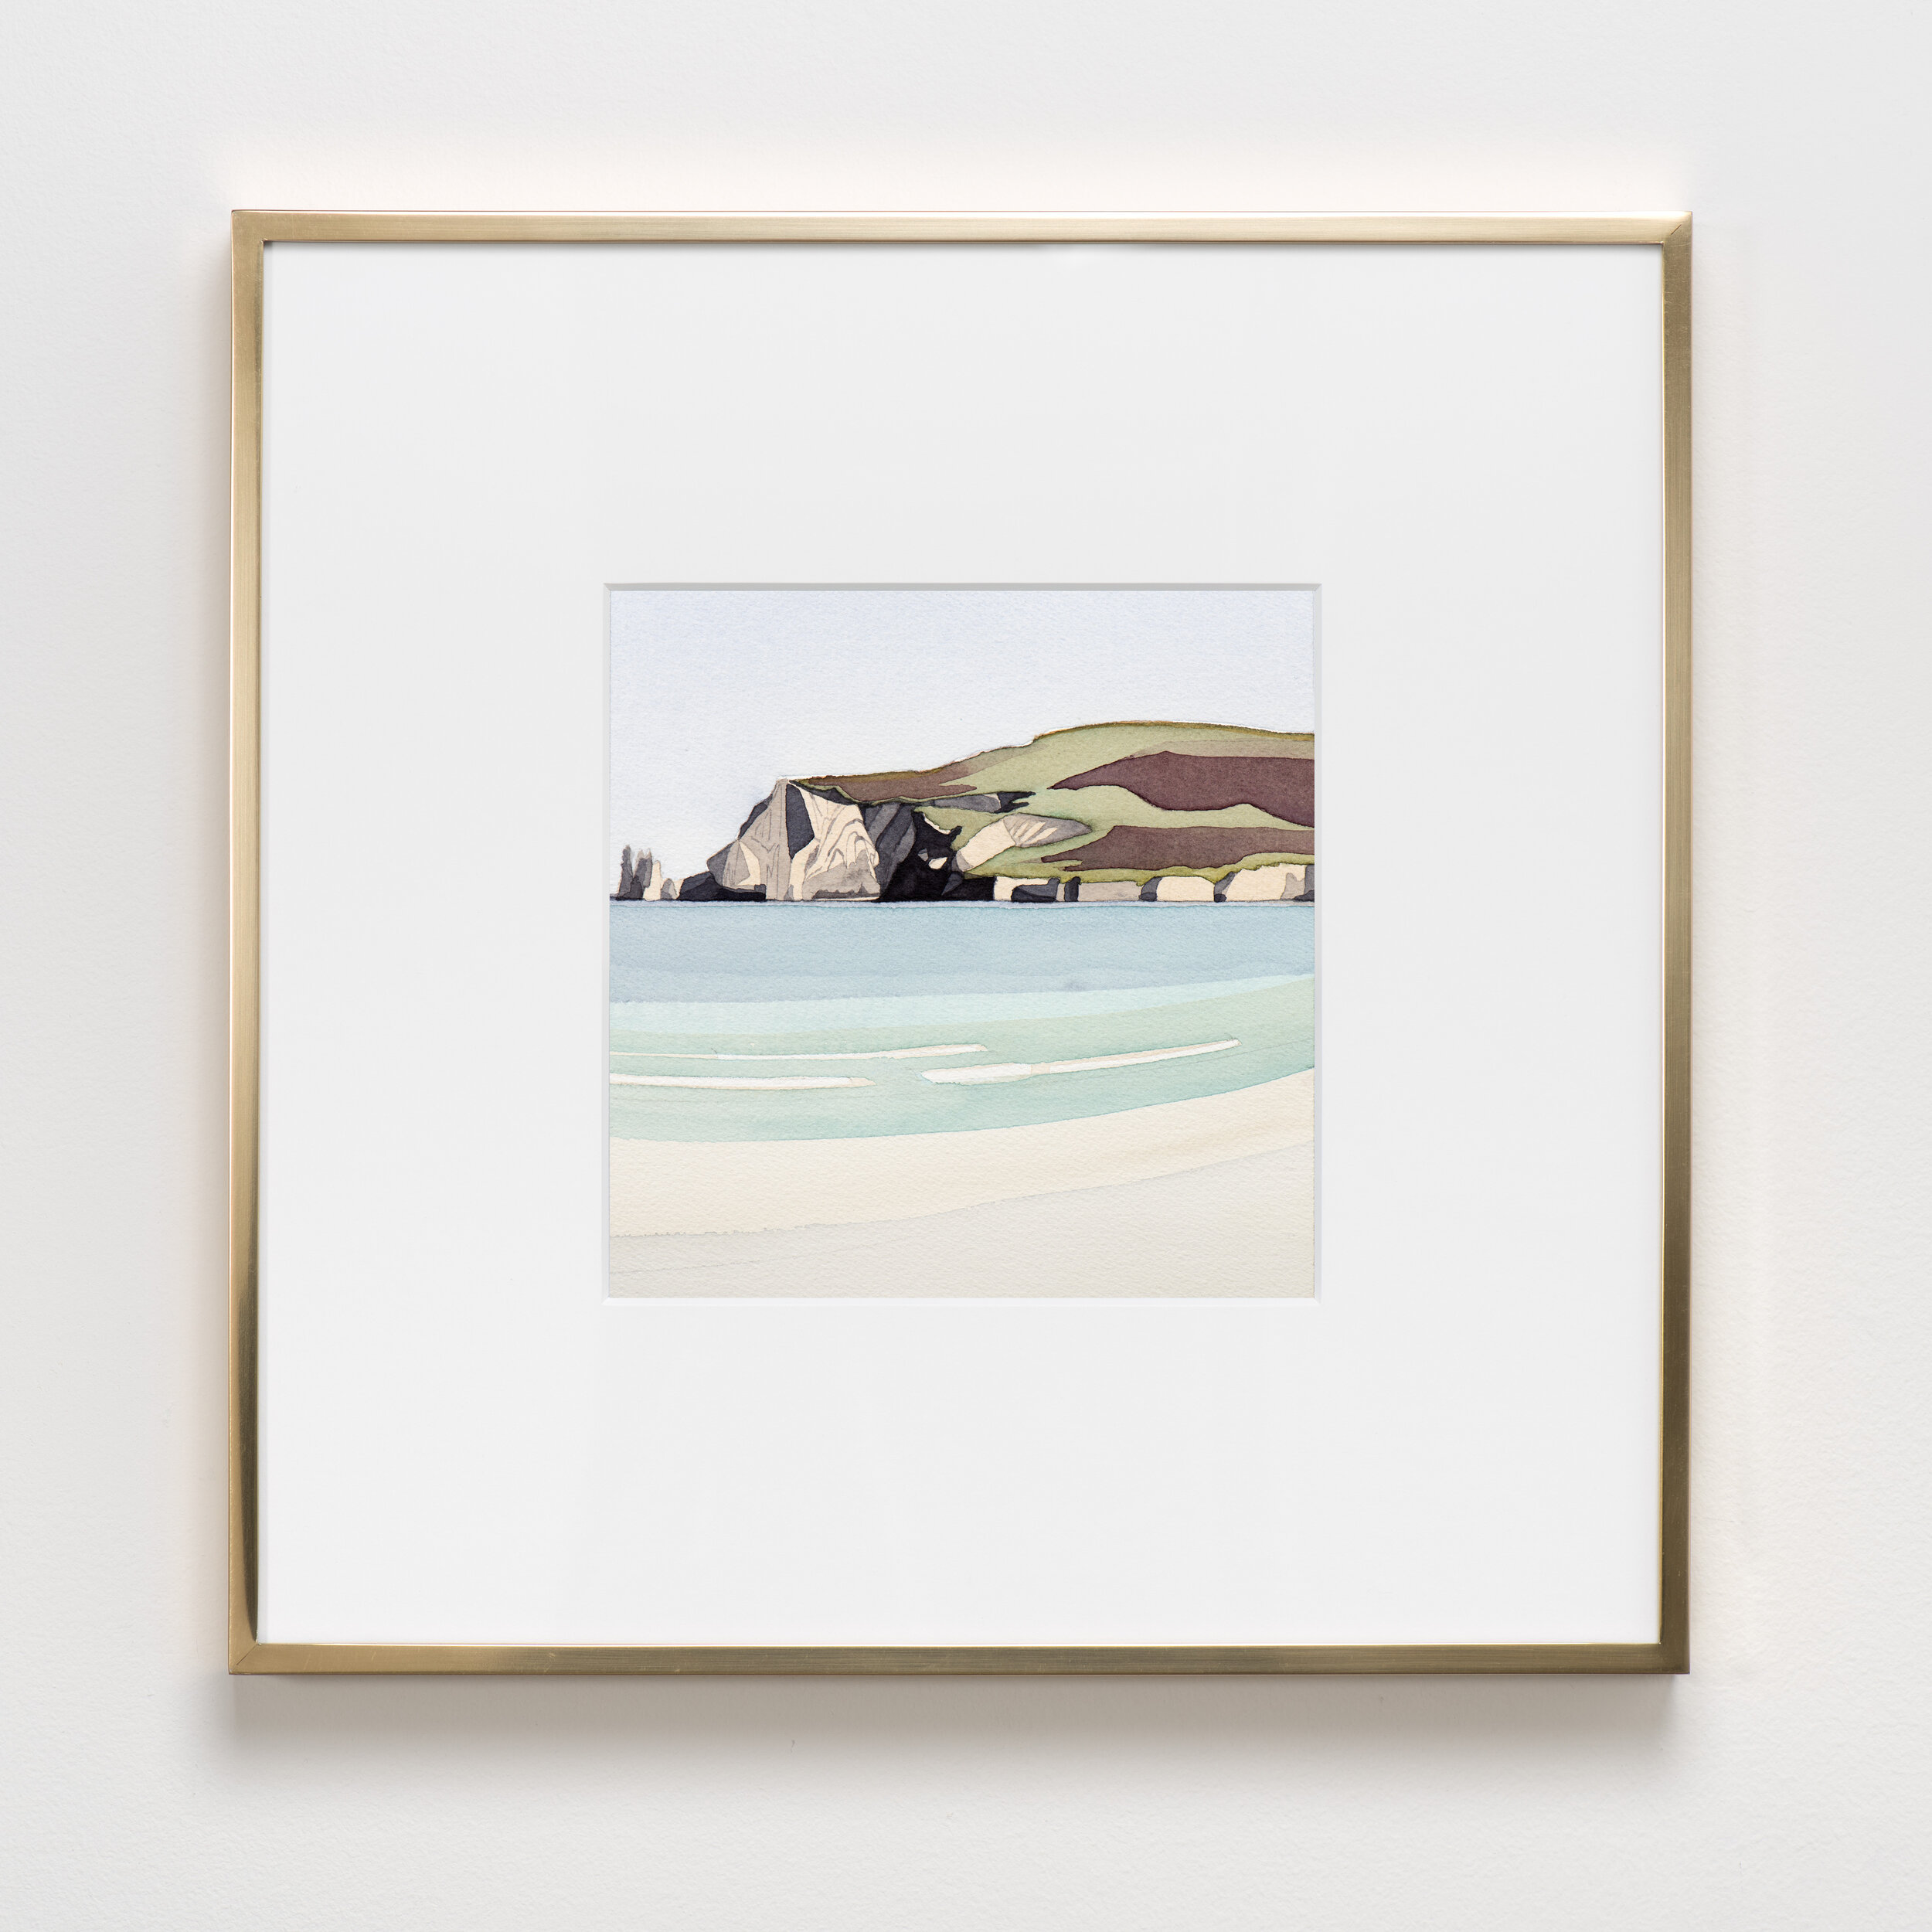   Ceannabeinne Beach , 2019 Watercolor on paper 16 1/4 x 16 1/4 inches (framed) 